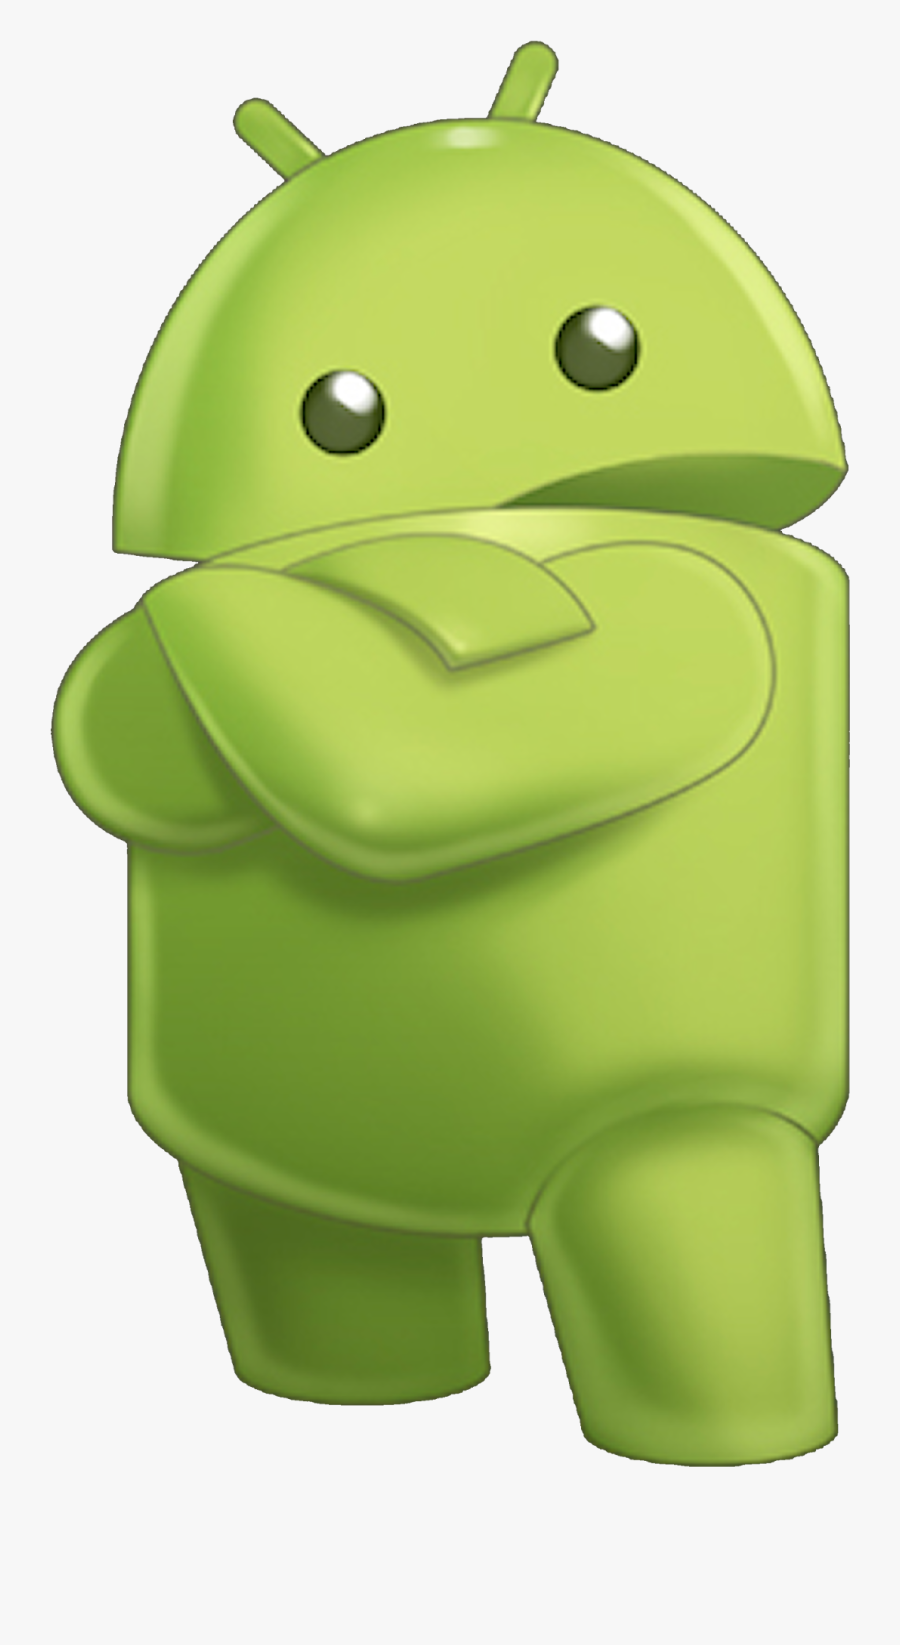 Download Andro - Boneco Android Png, Transparent Clipart